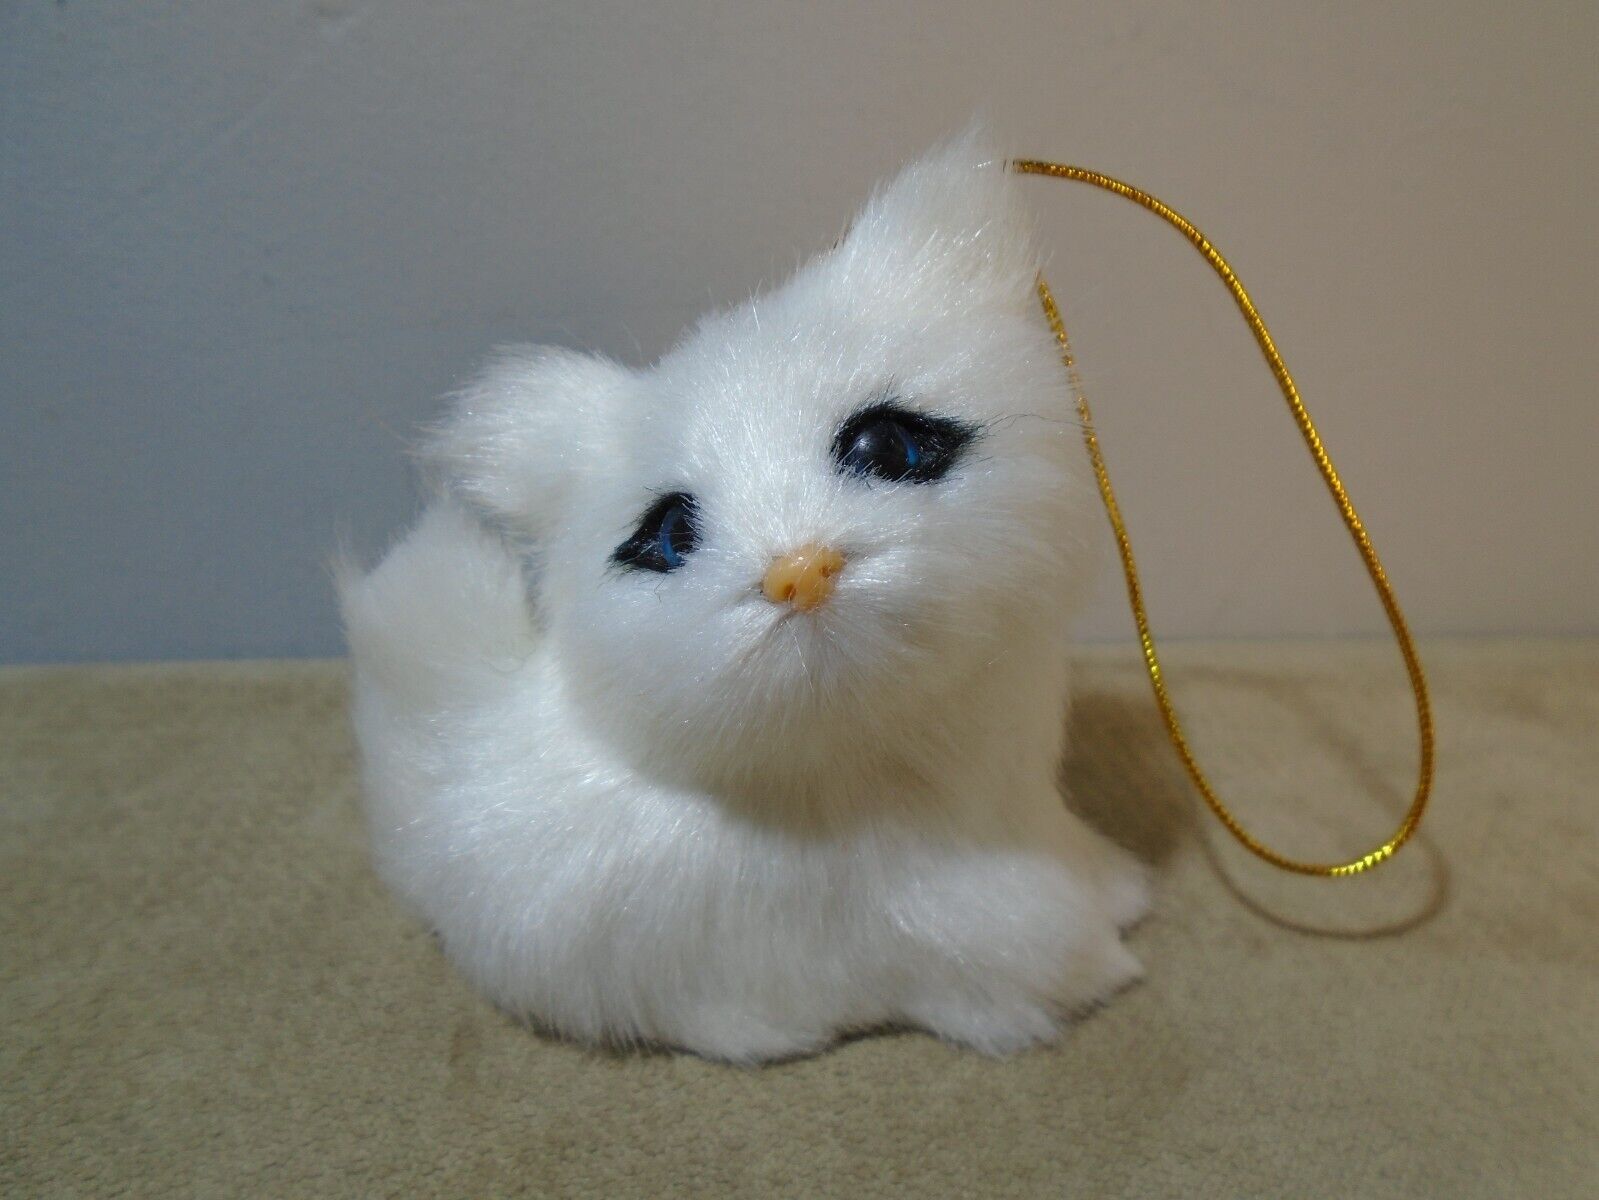 CUTE FURRY WHITE KITTY CAT 2.75” ORNAMENT UNBRANDED (CB3707)